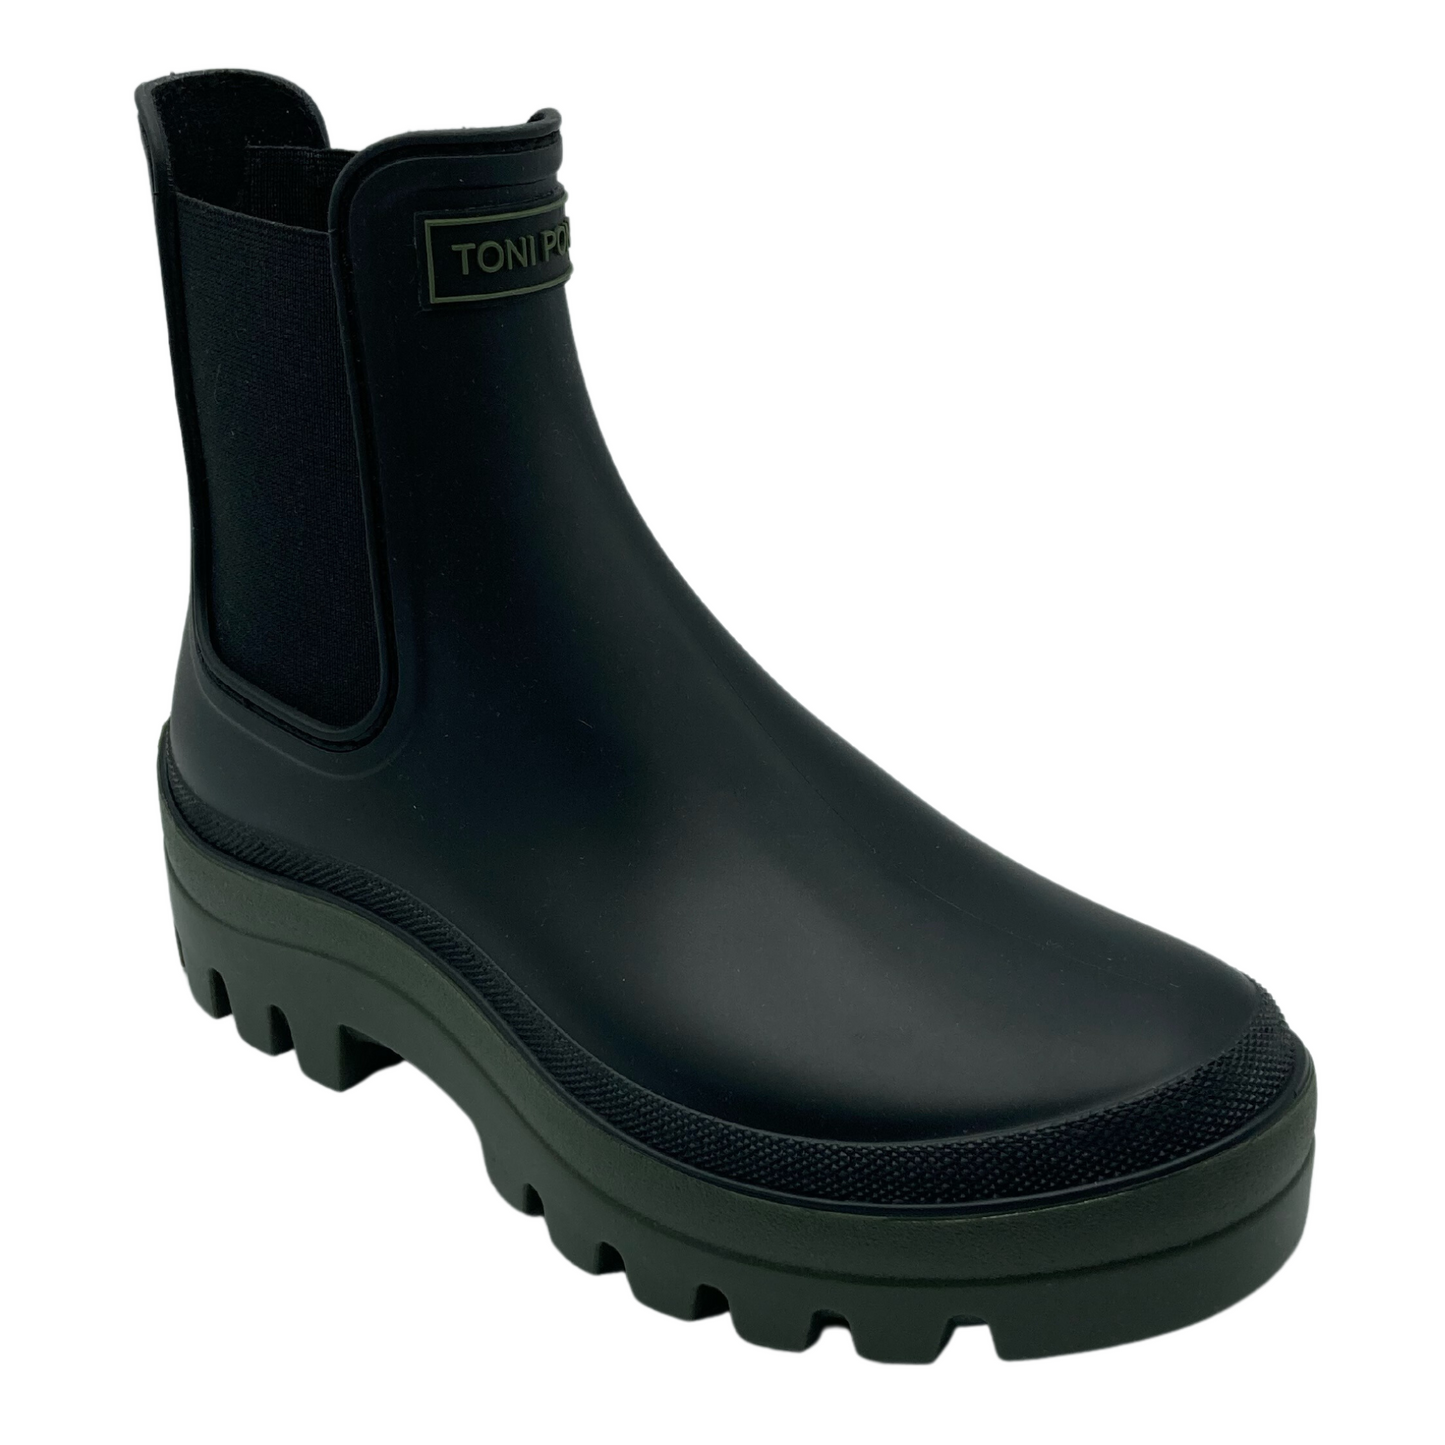 45 degree angled view of black chelsea boot with khaki rubber sole and elastic sides